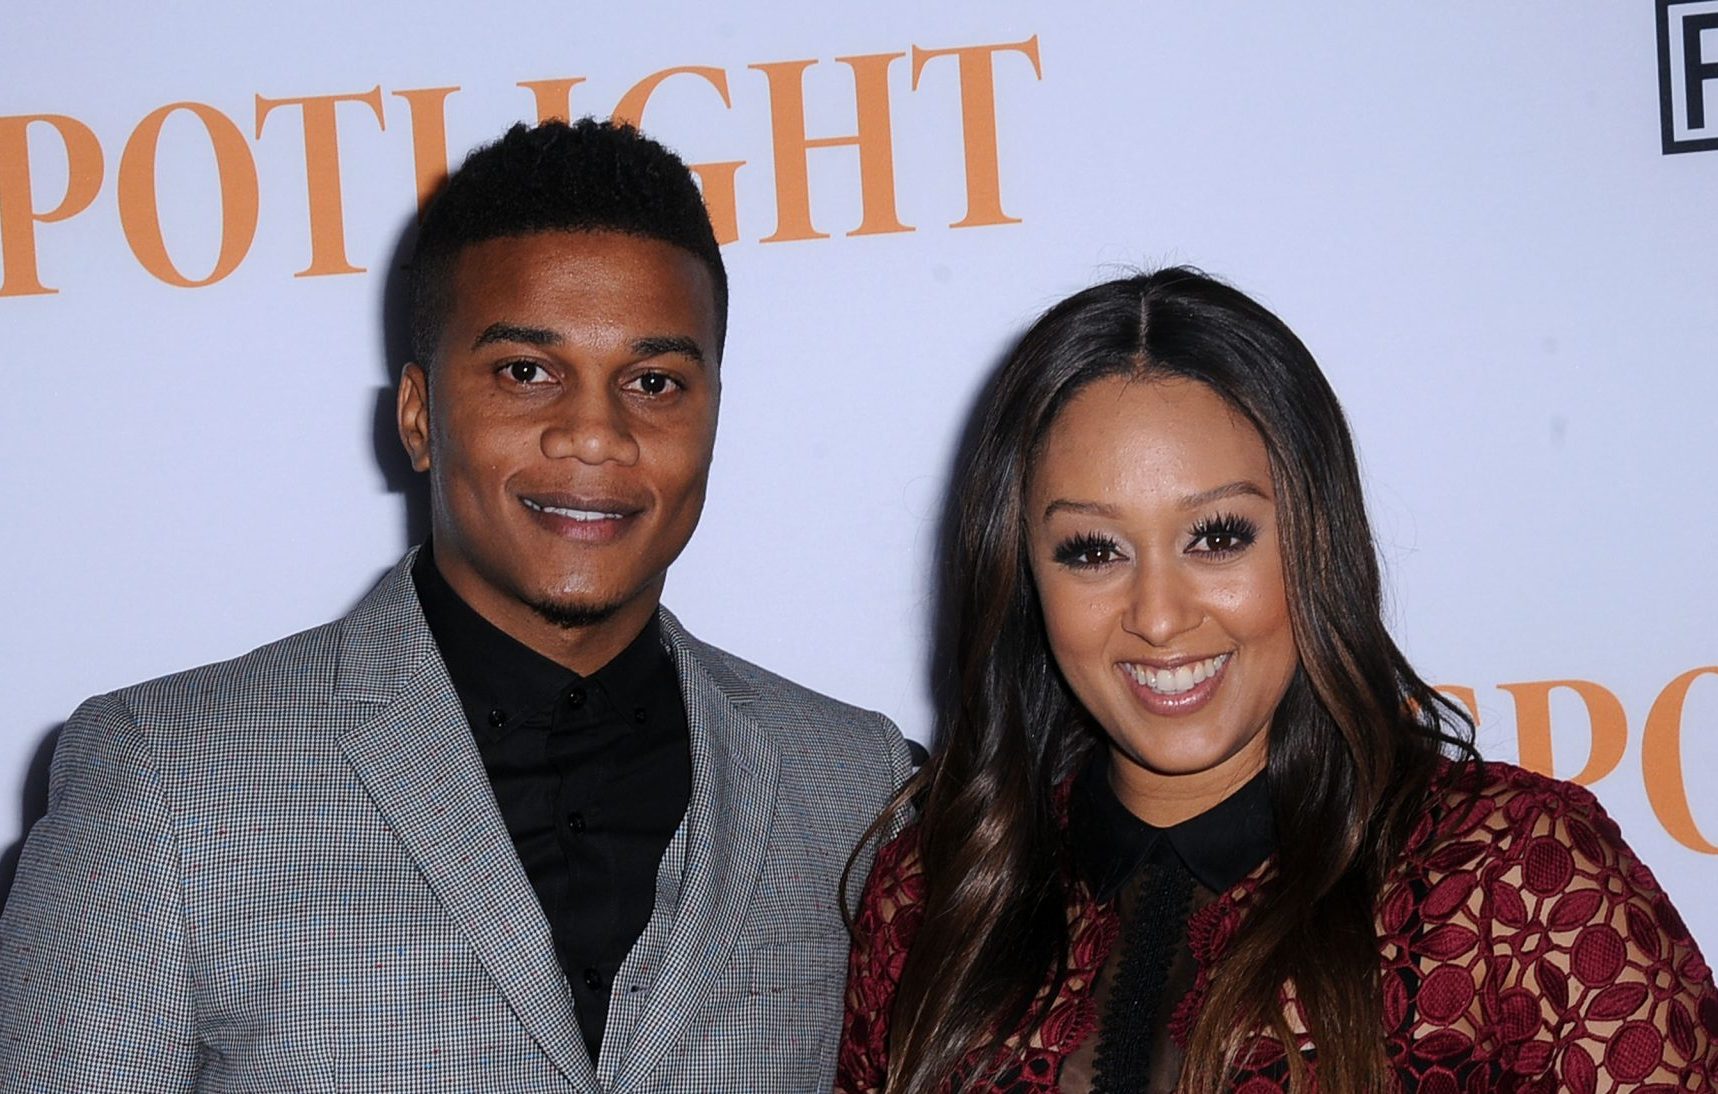 Tia Mowry Shares She’s At “Peace,” Trades Love Comments With Cory Hardrict Amid Divorce News